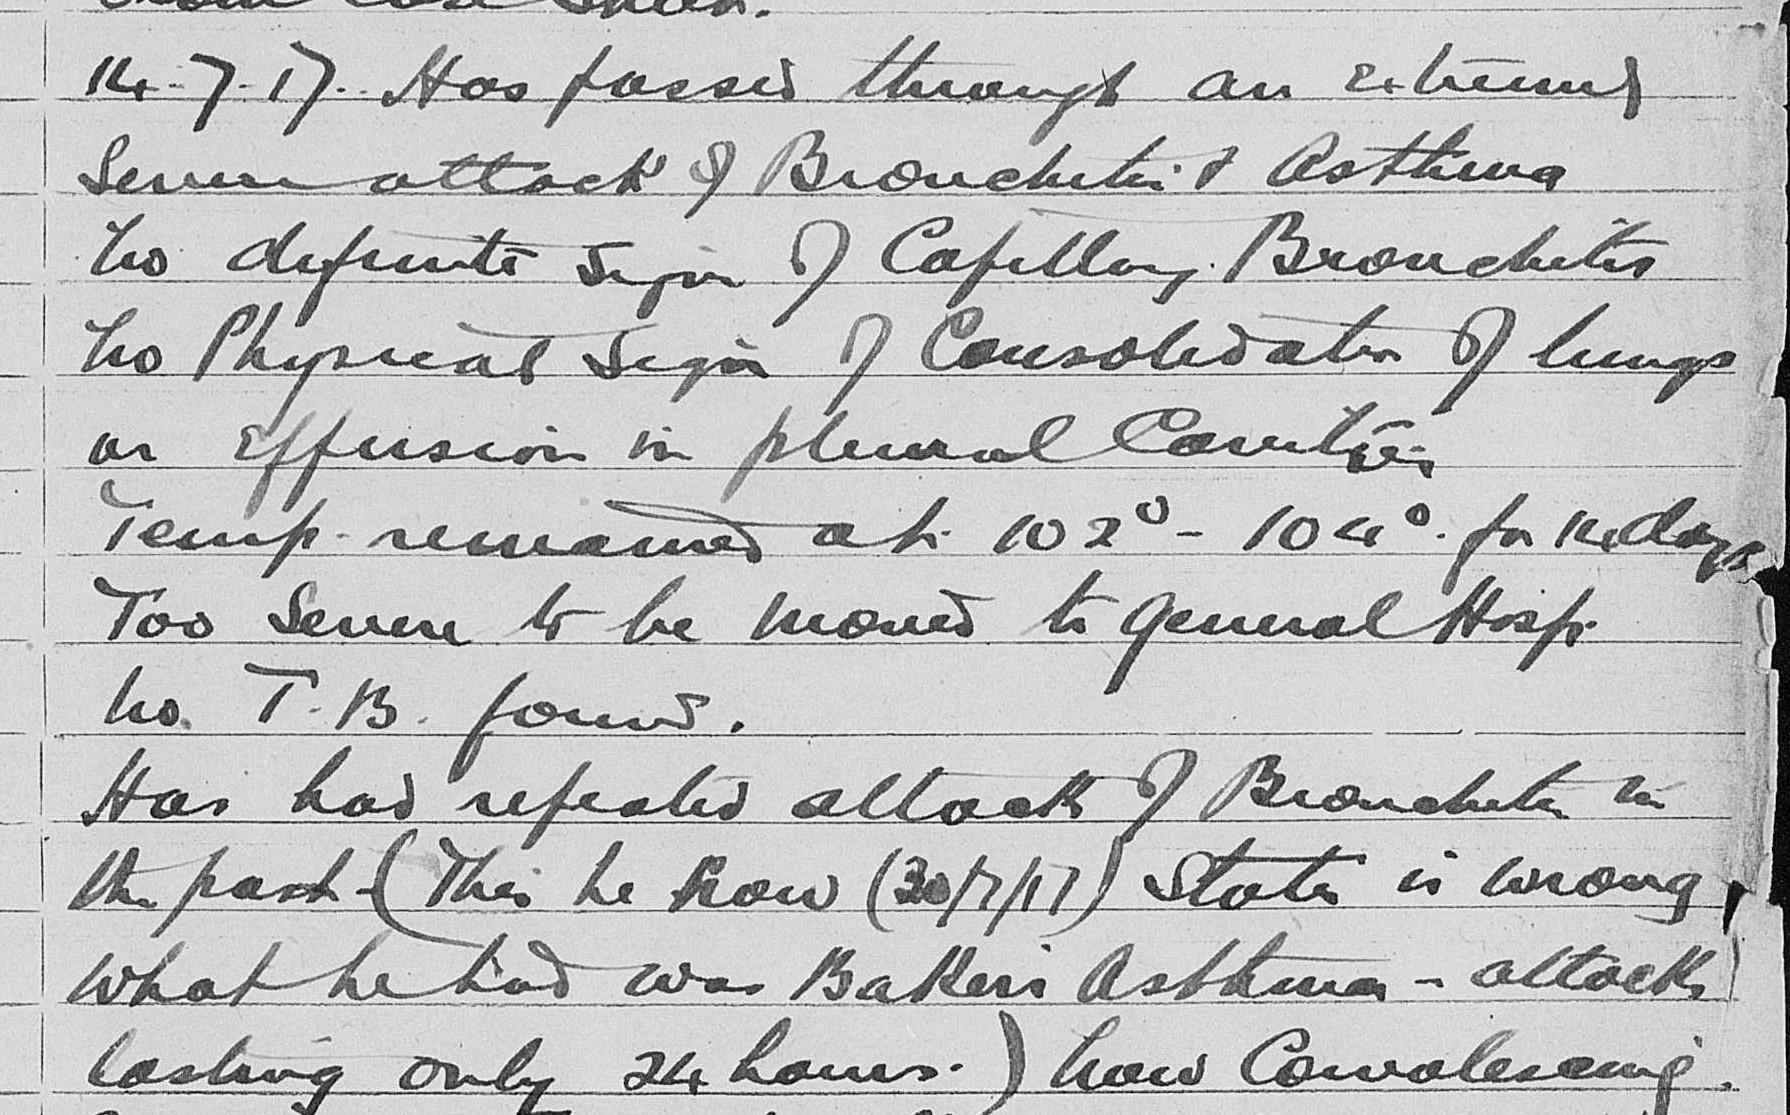 Extract from FWW medical notes